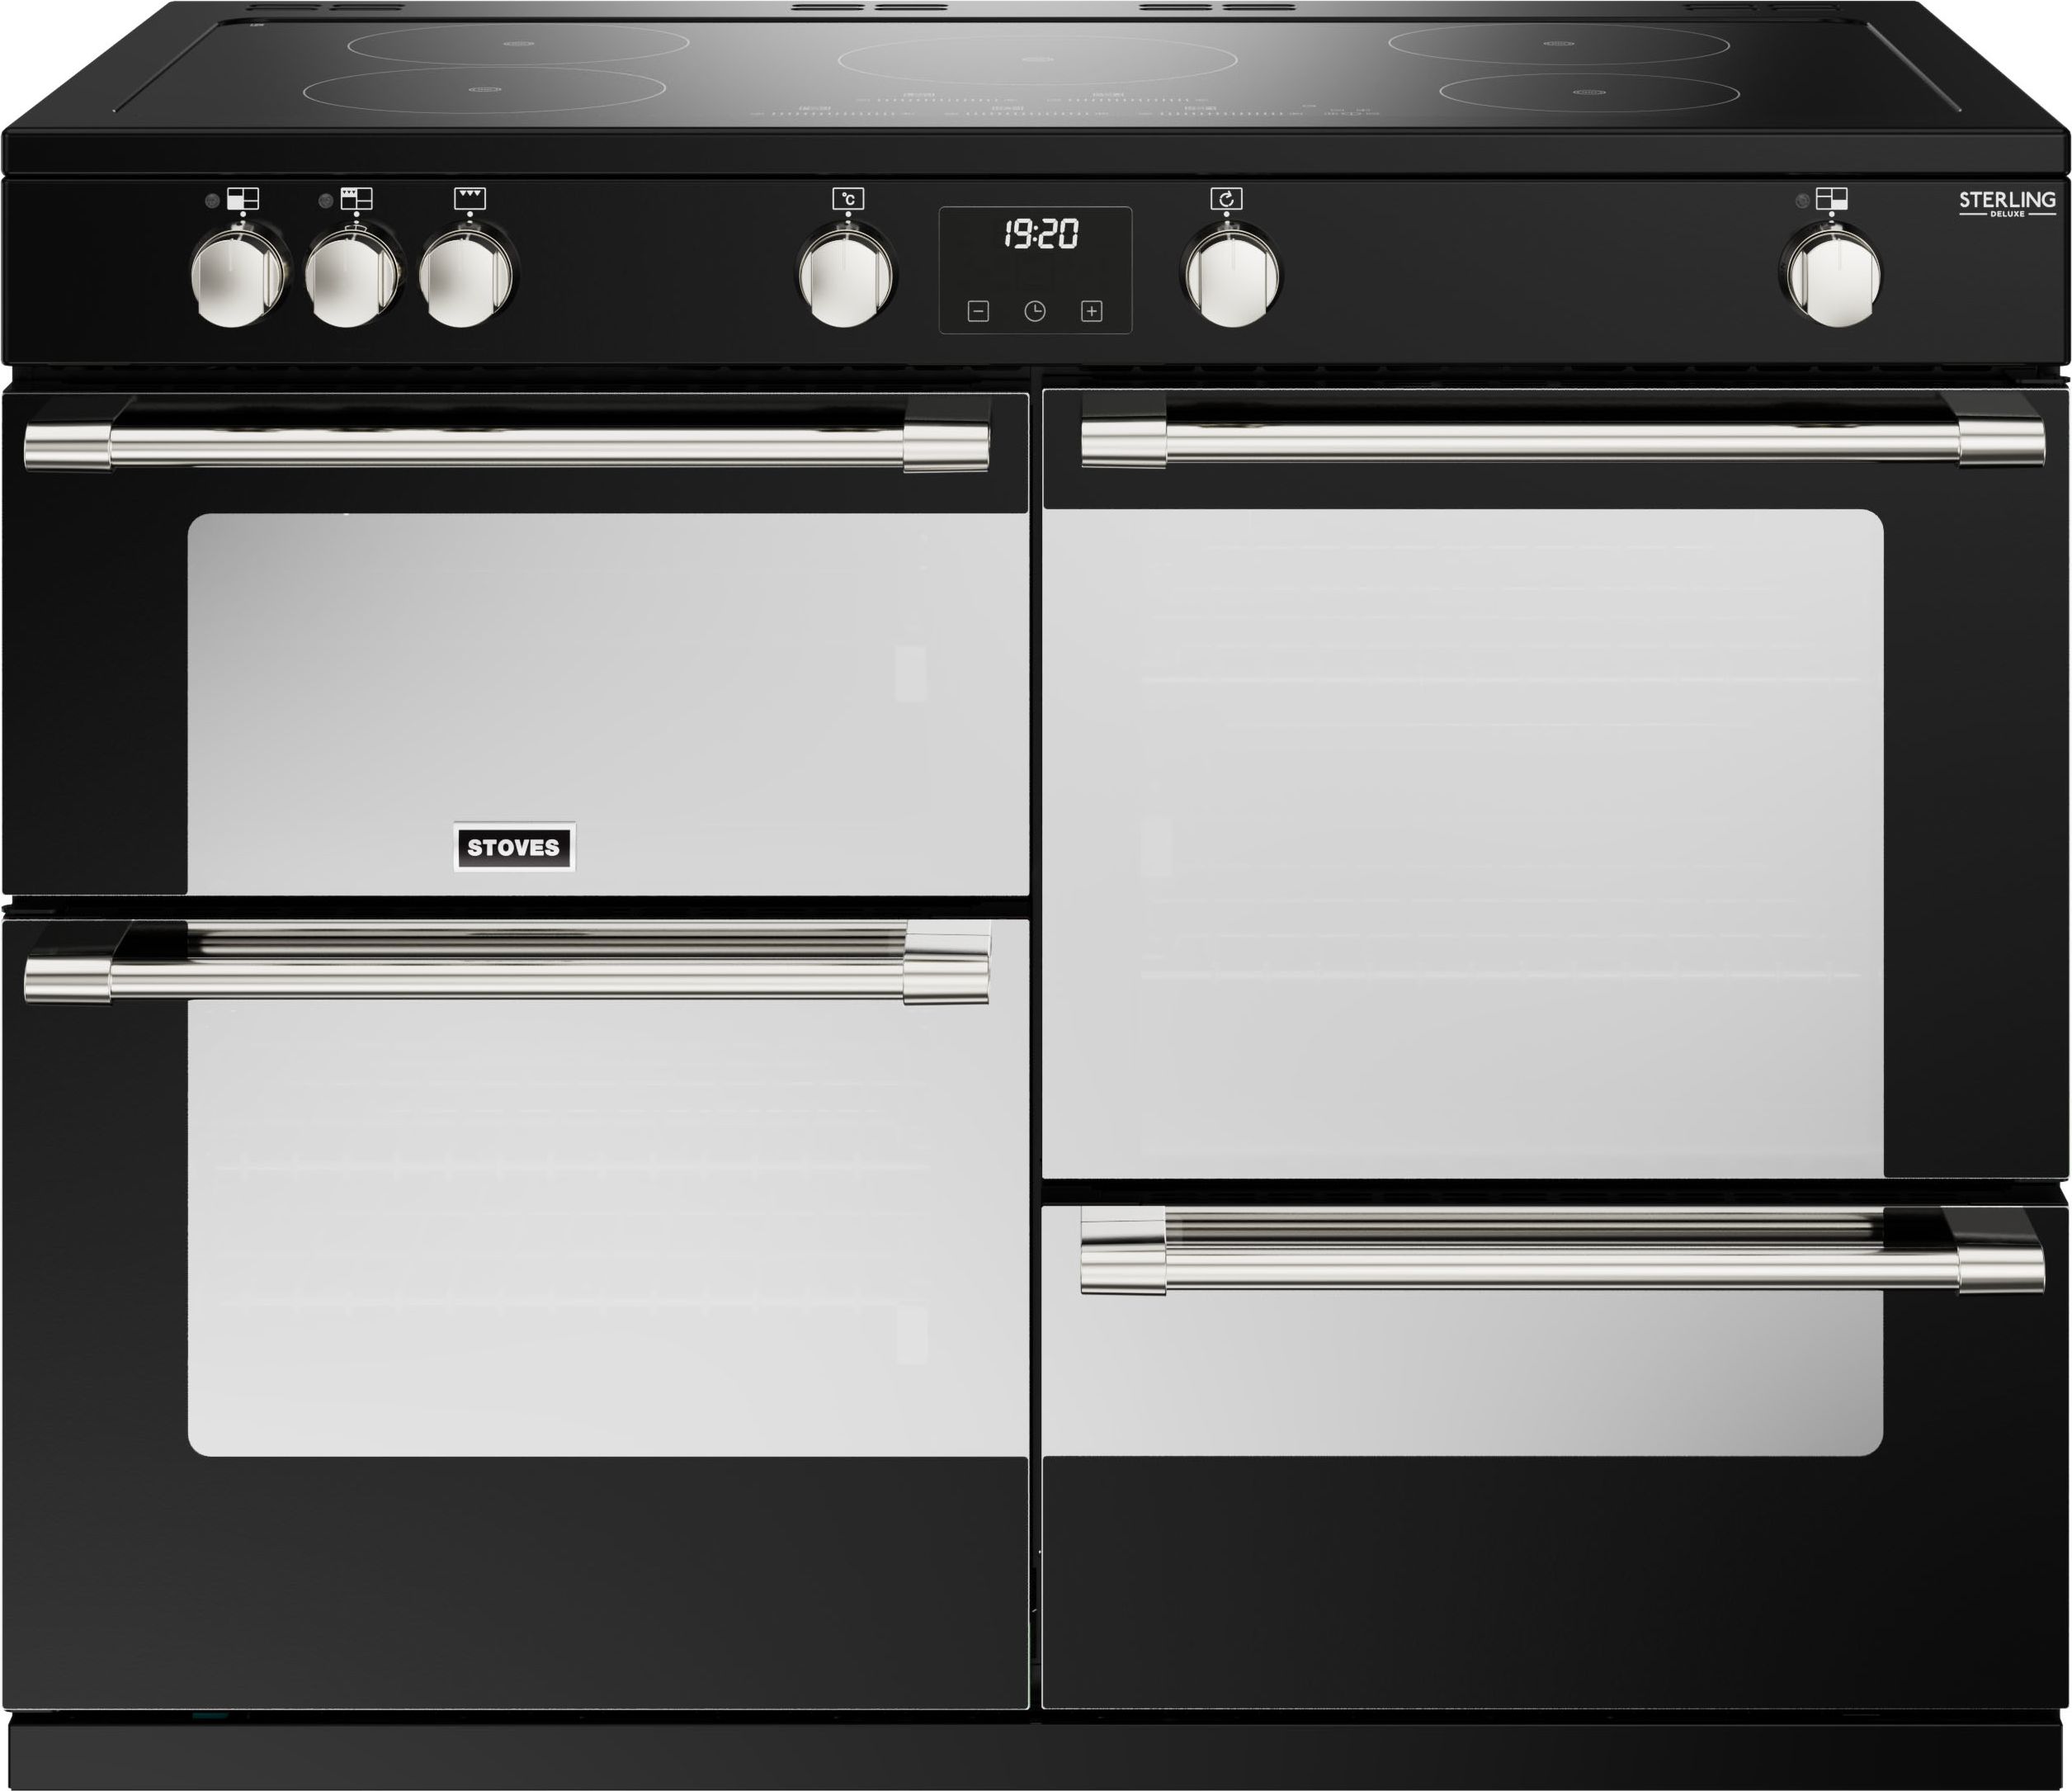 Stoves Sterling Deluxe ST DX STER D1100Ei TCH BK 110cm Electric Range Cooker with Induction Hob - Black - A/A/A Rated, Black